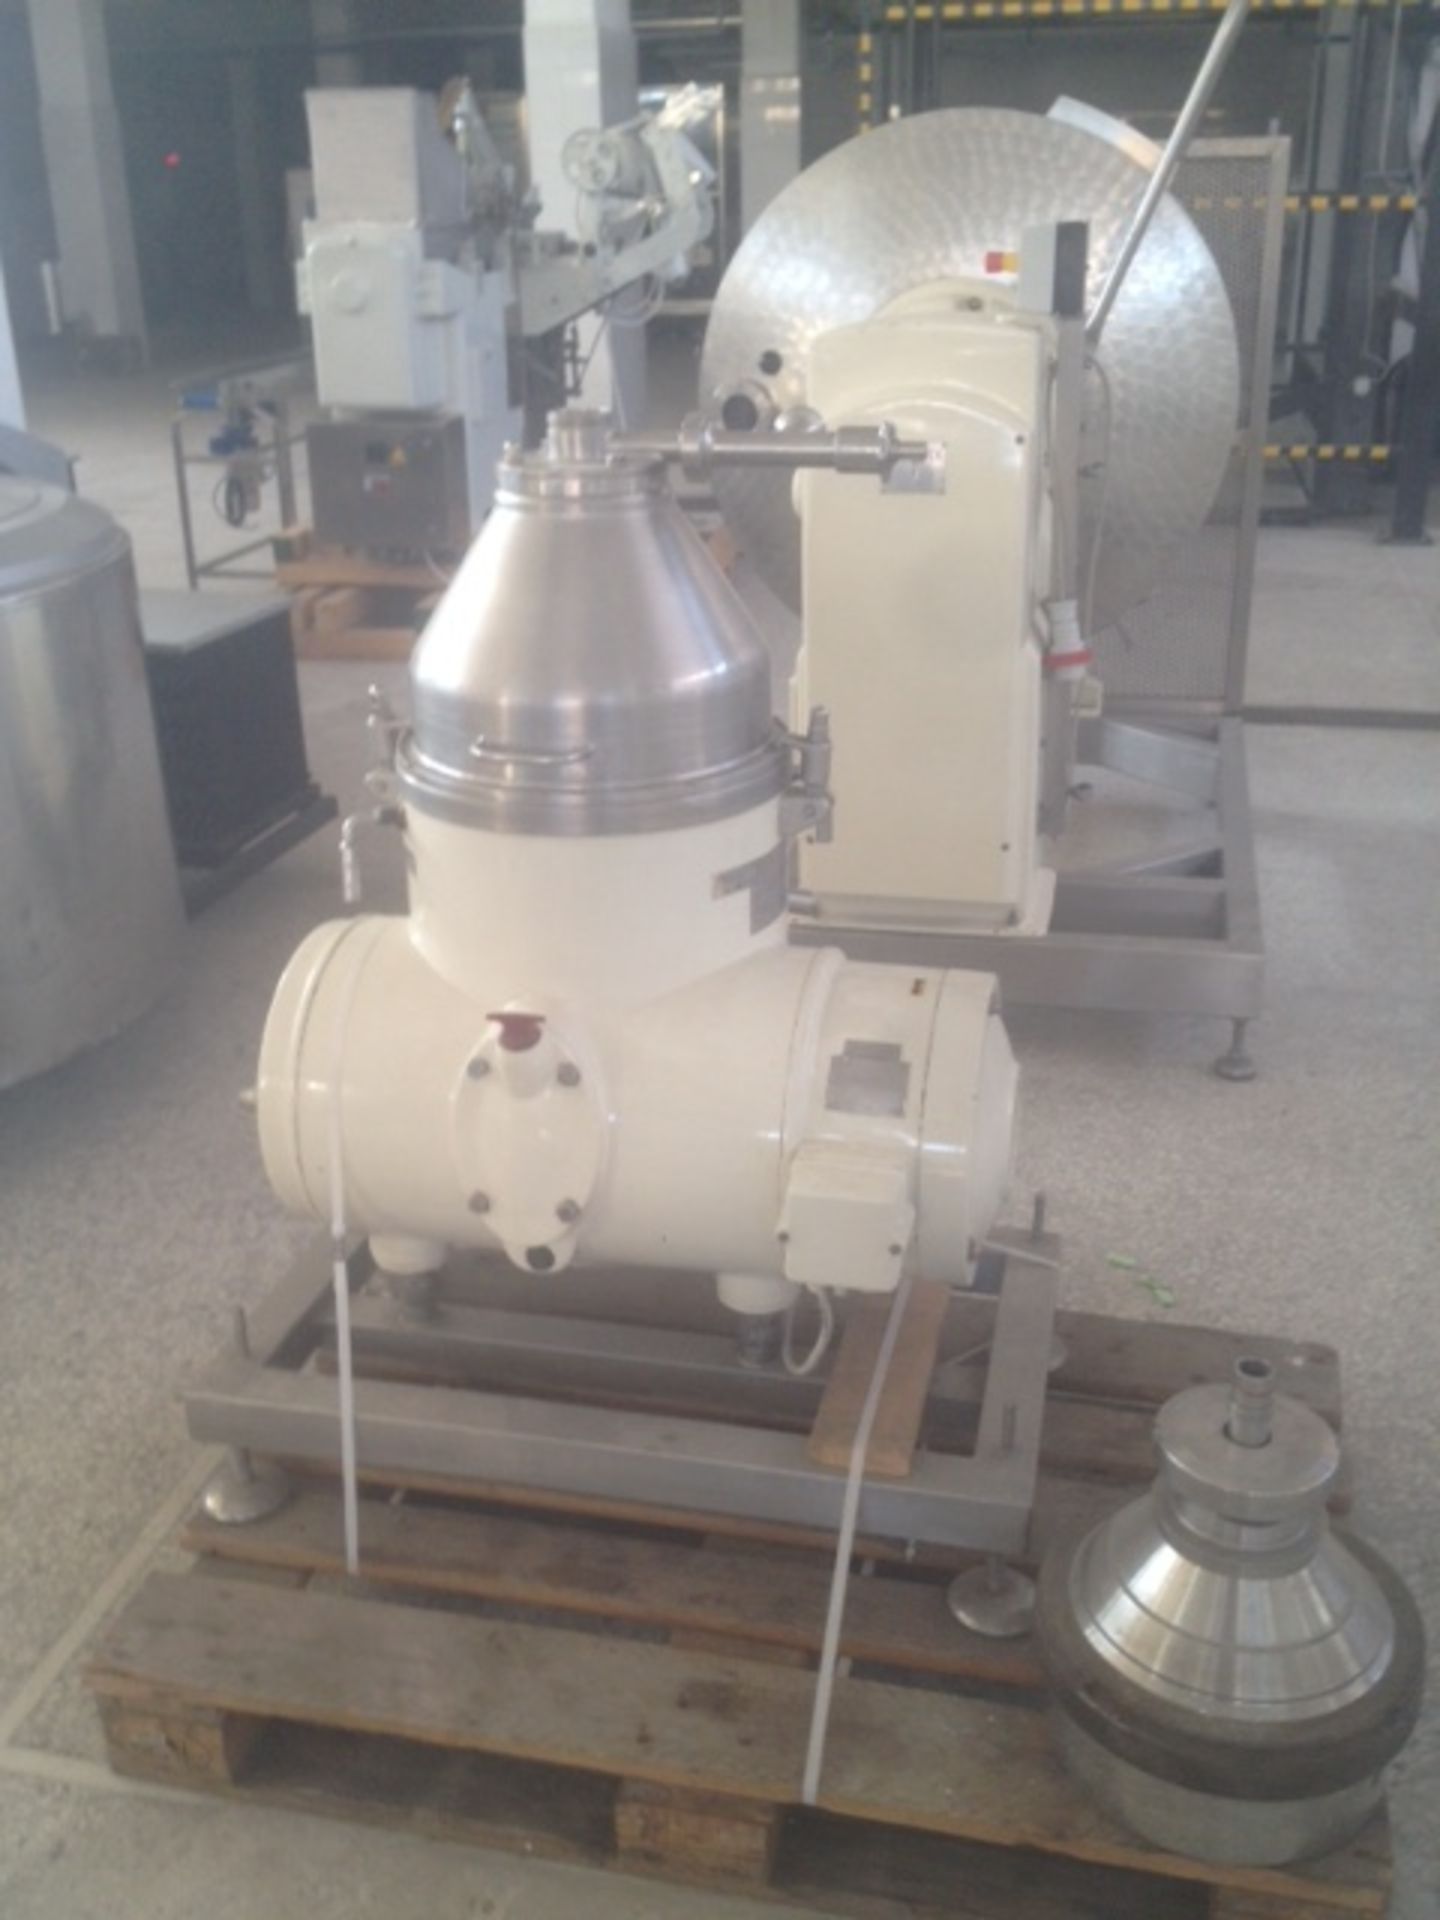 Westfalia Separator, 1000-1500 L, Recently Refurbished, Very Good Condition - Image 2 of 3